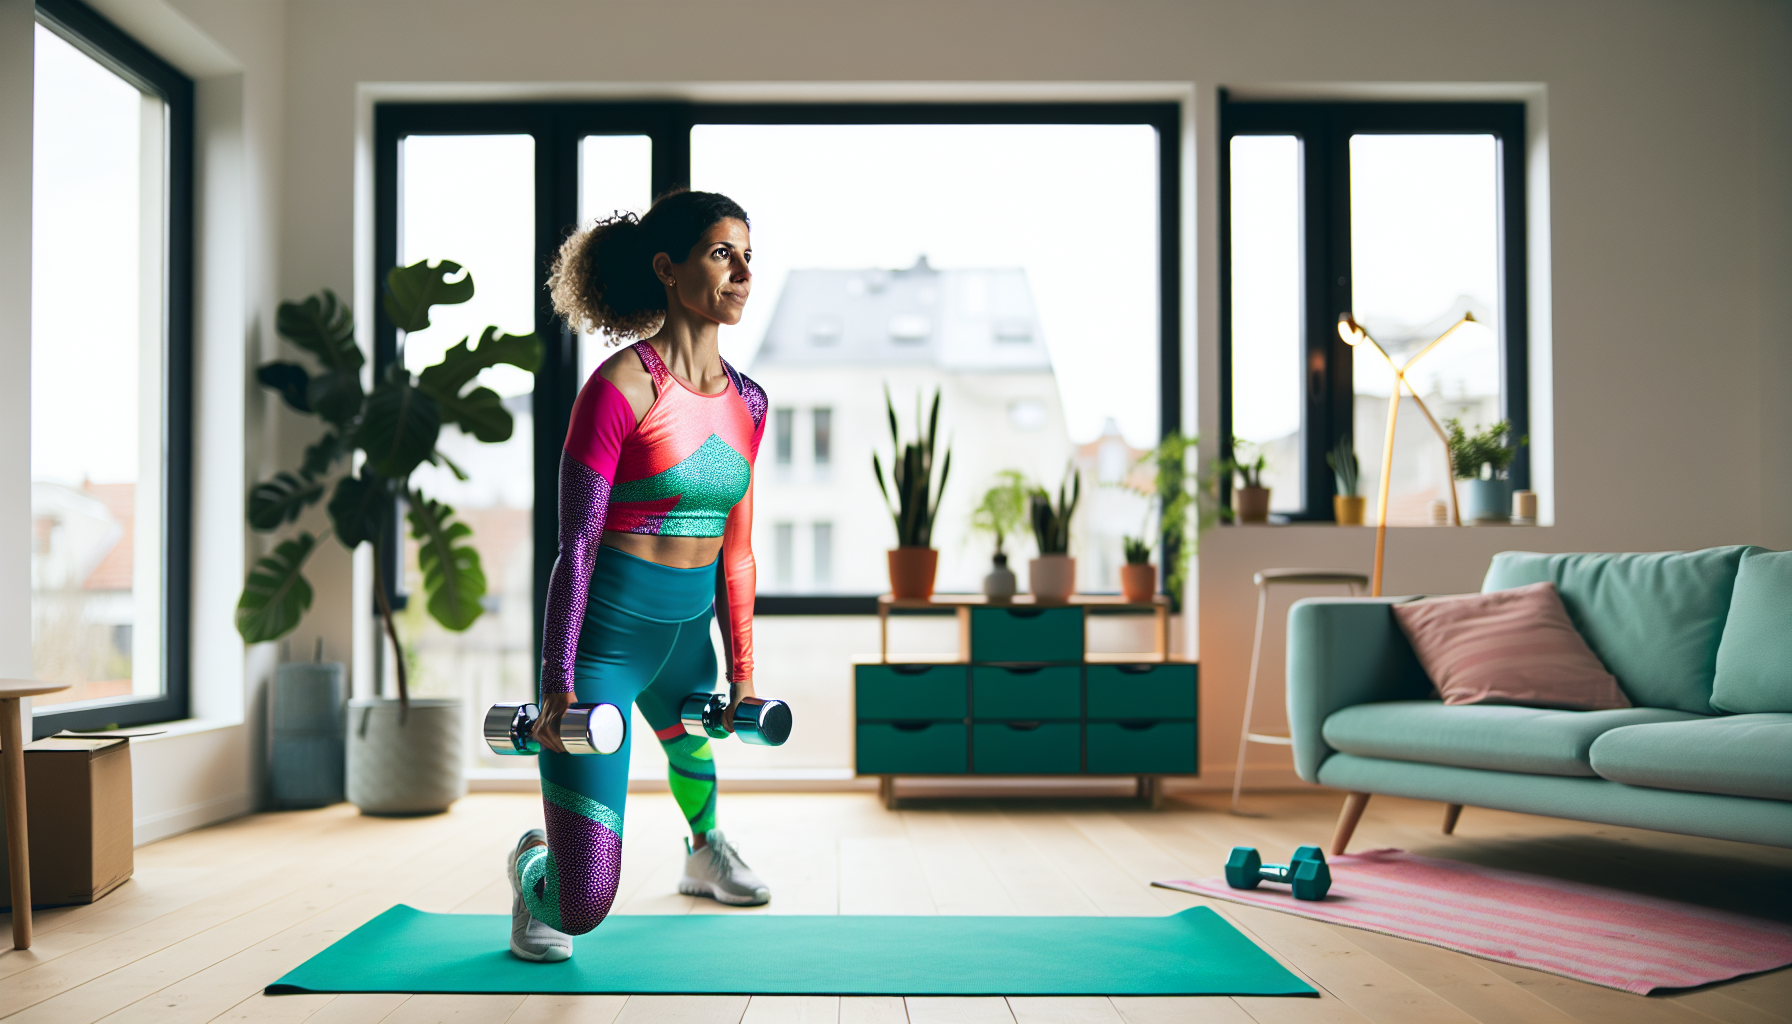 A person exercising at home with dumbbells and a yoga mat